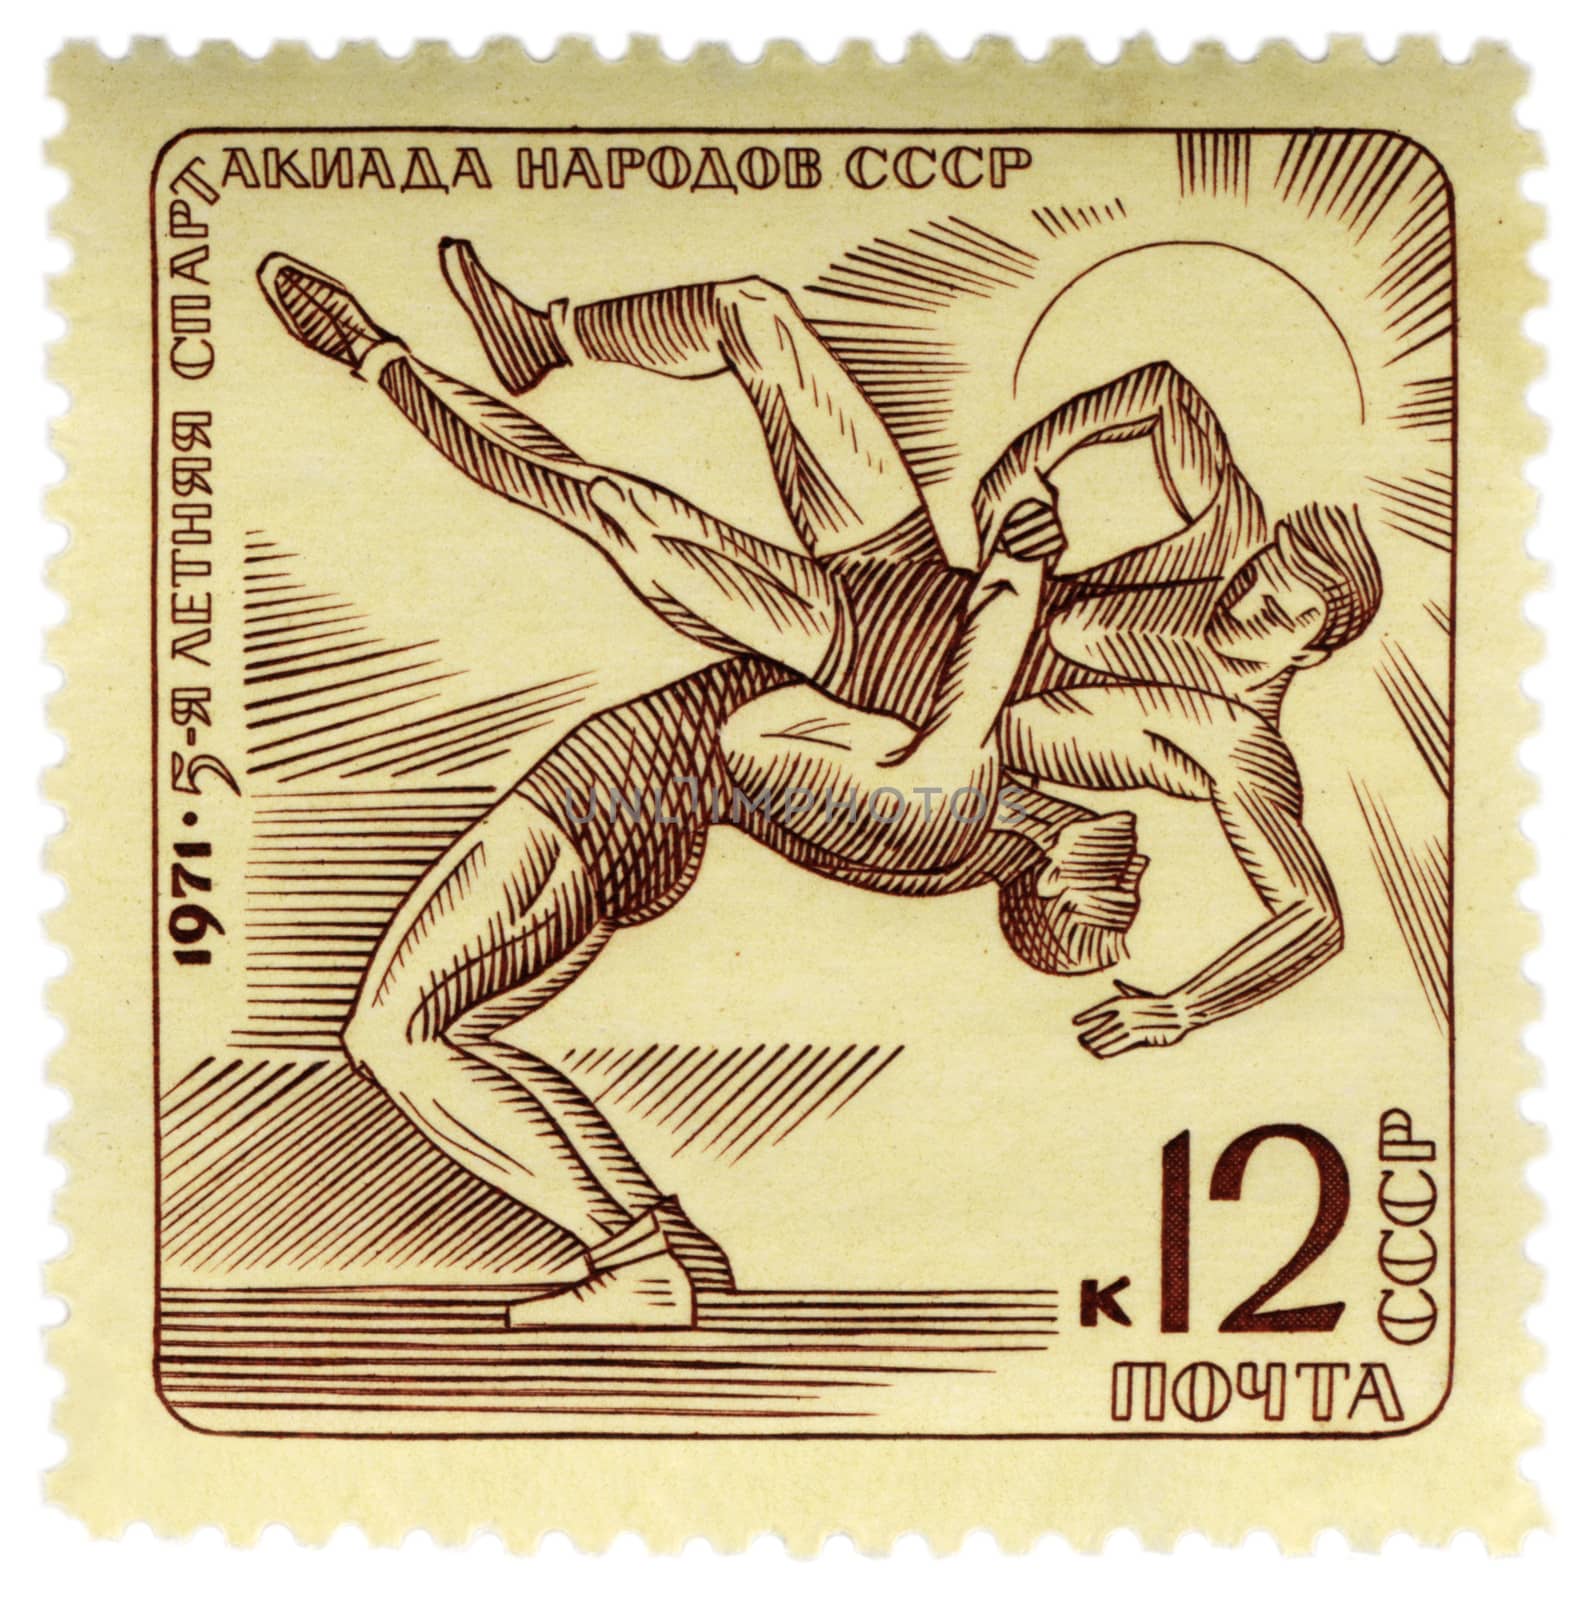 USSR - CIRCA 1971: A stamp printed in USSR shows wrestling, series, circa 1971